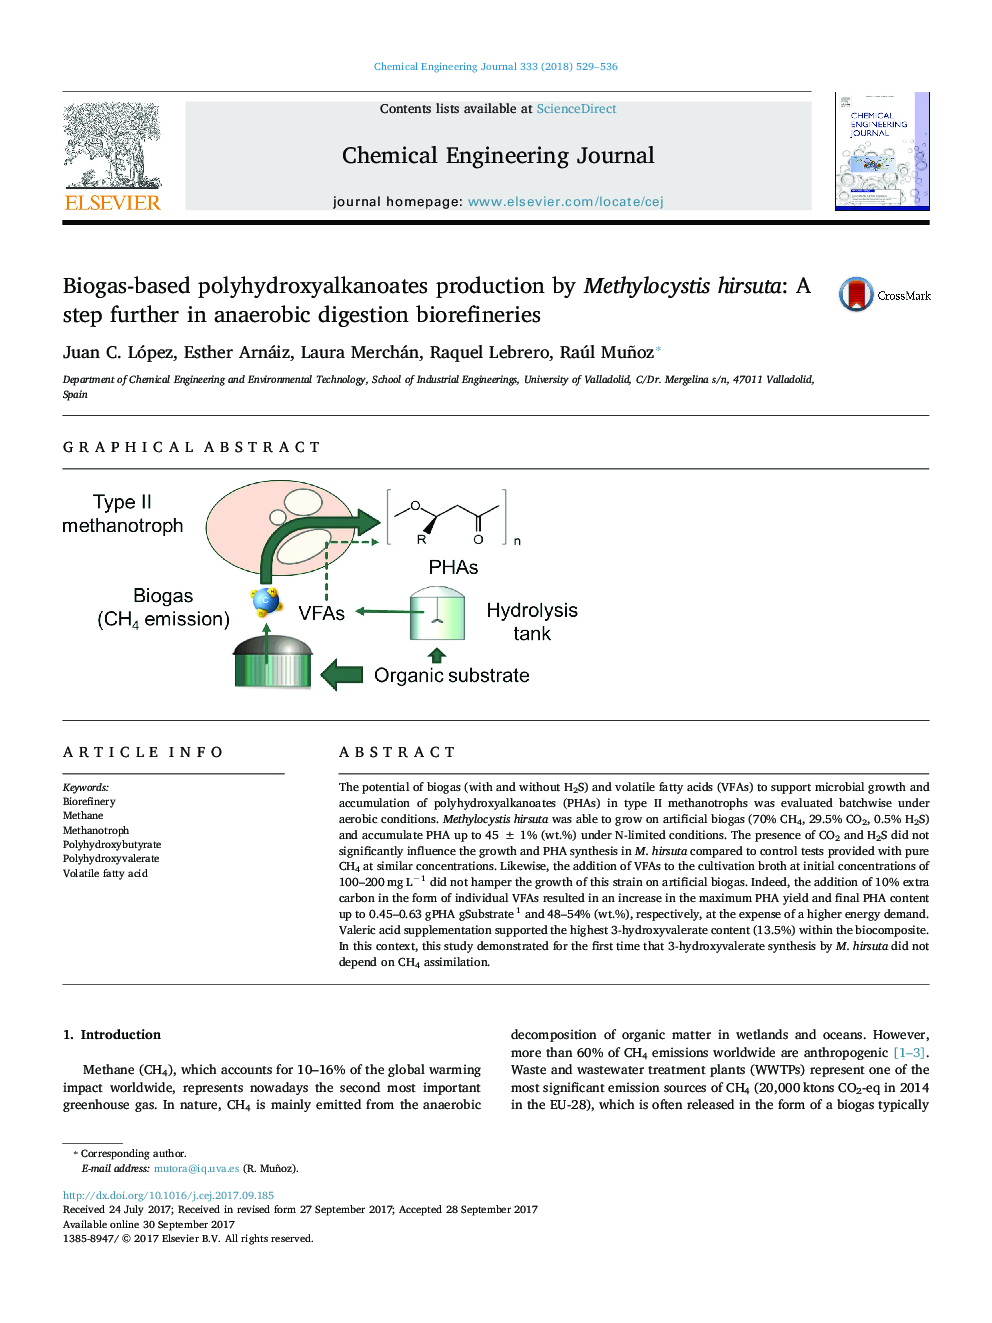 Biogas-based polyhydroxyalkanoates production by Methylocystis hirsuta: A step further in anaerobic digestion biorefineries